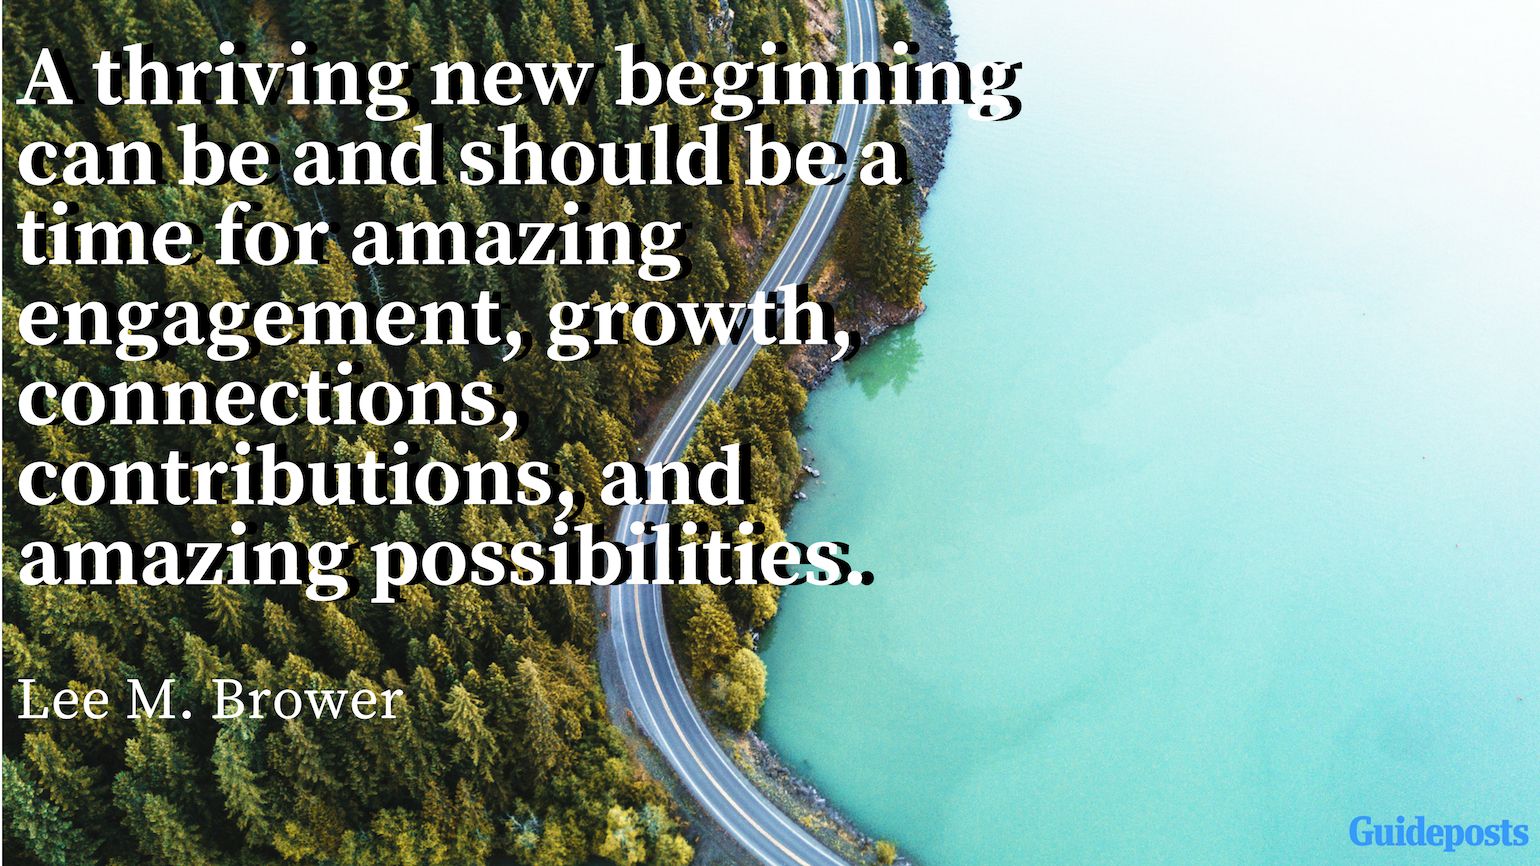 Inspirational Quotes for Retirement: "A thriving new beginning can be and should be a time for amazing engagement, growth, connections, contributions, and amazing possibilities.” – Lee M. Brower Better Living Life Advice